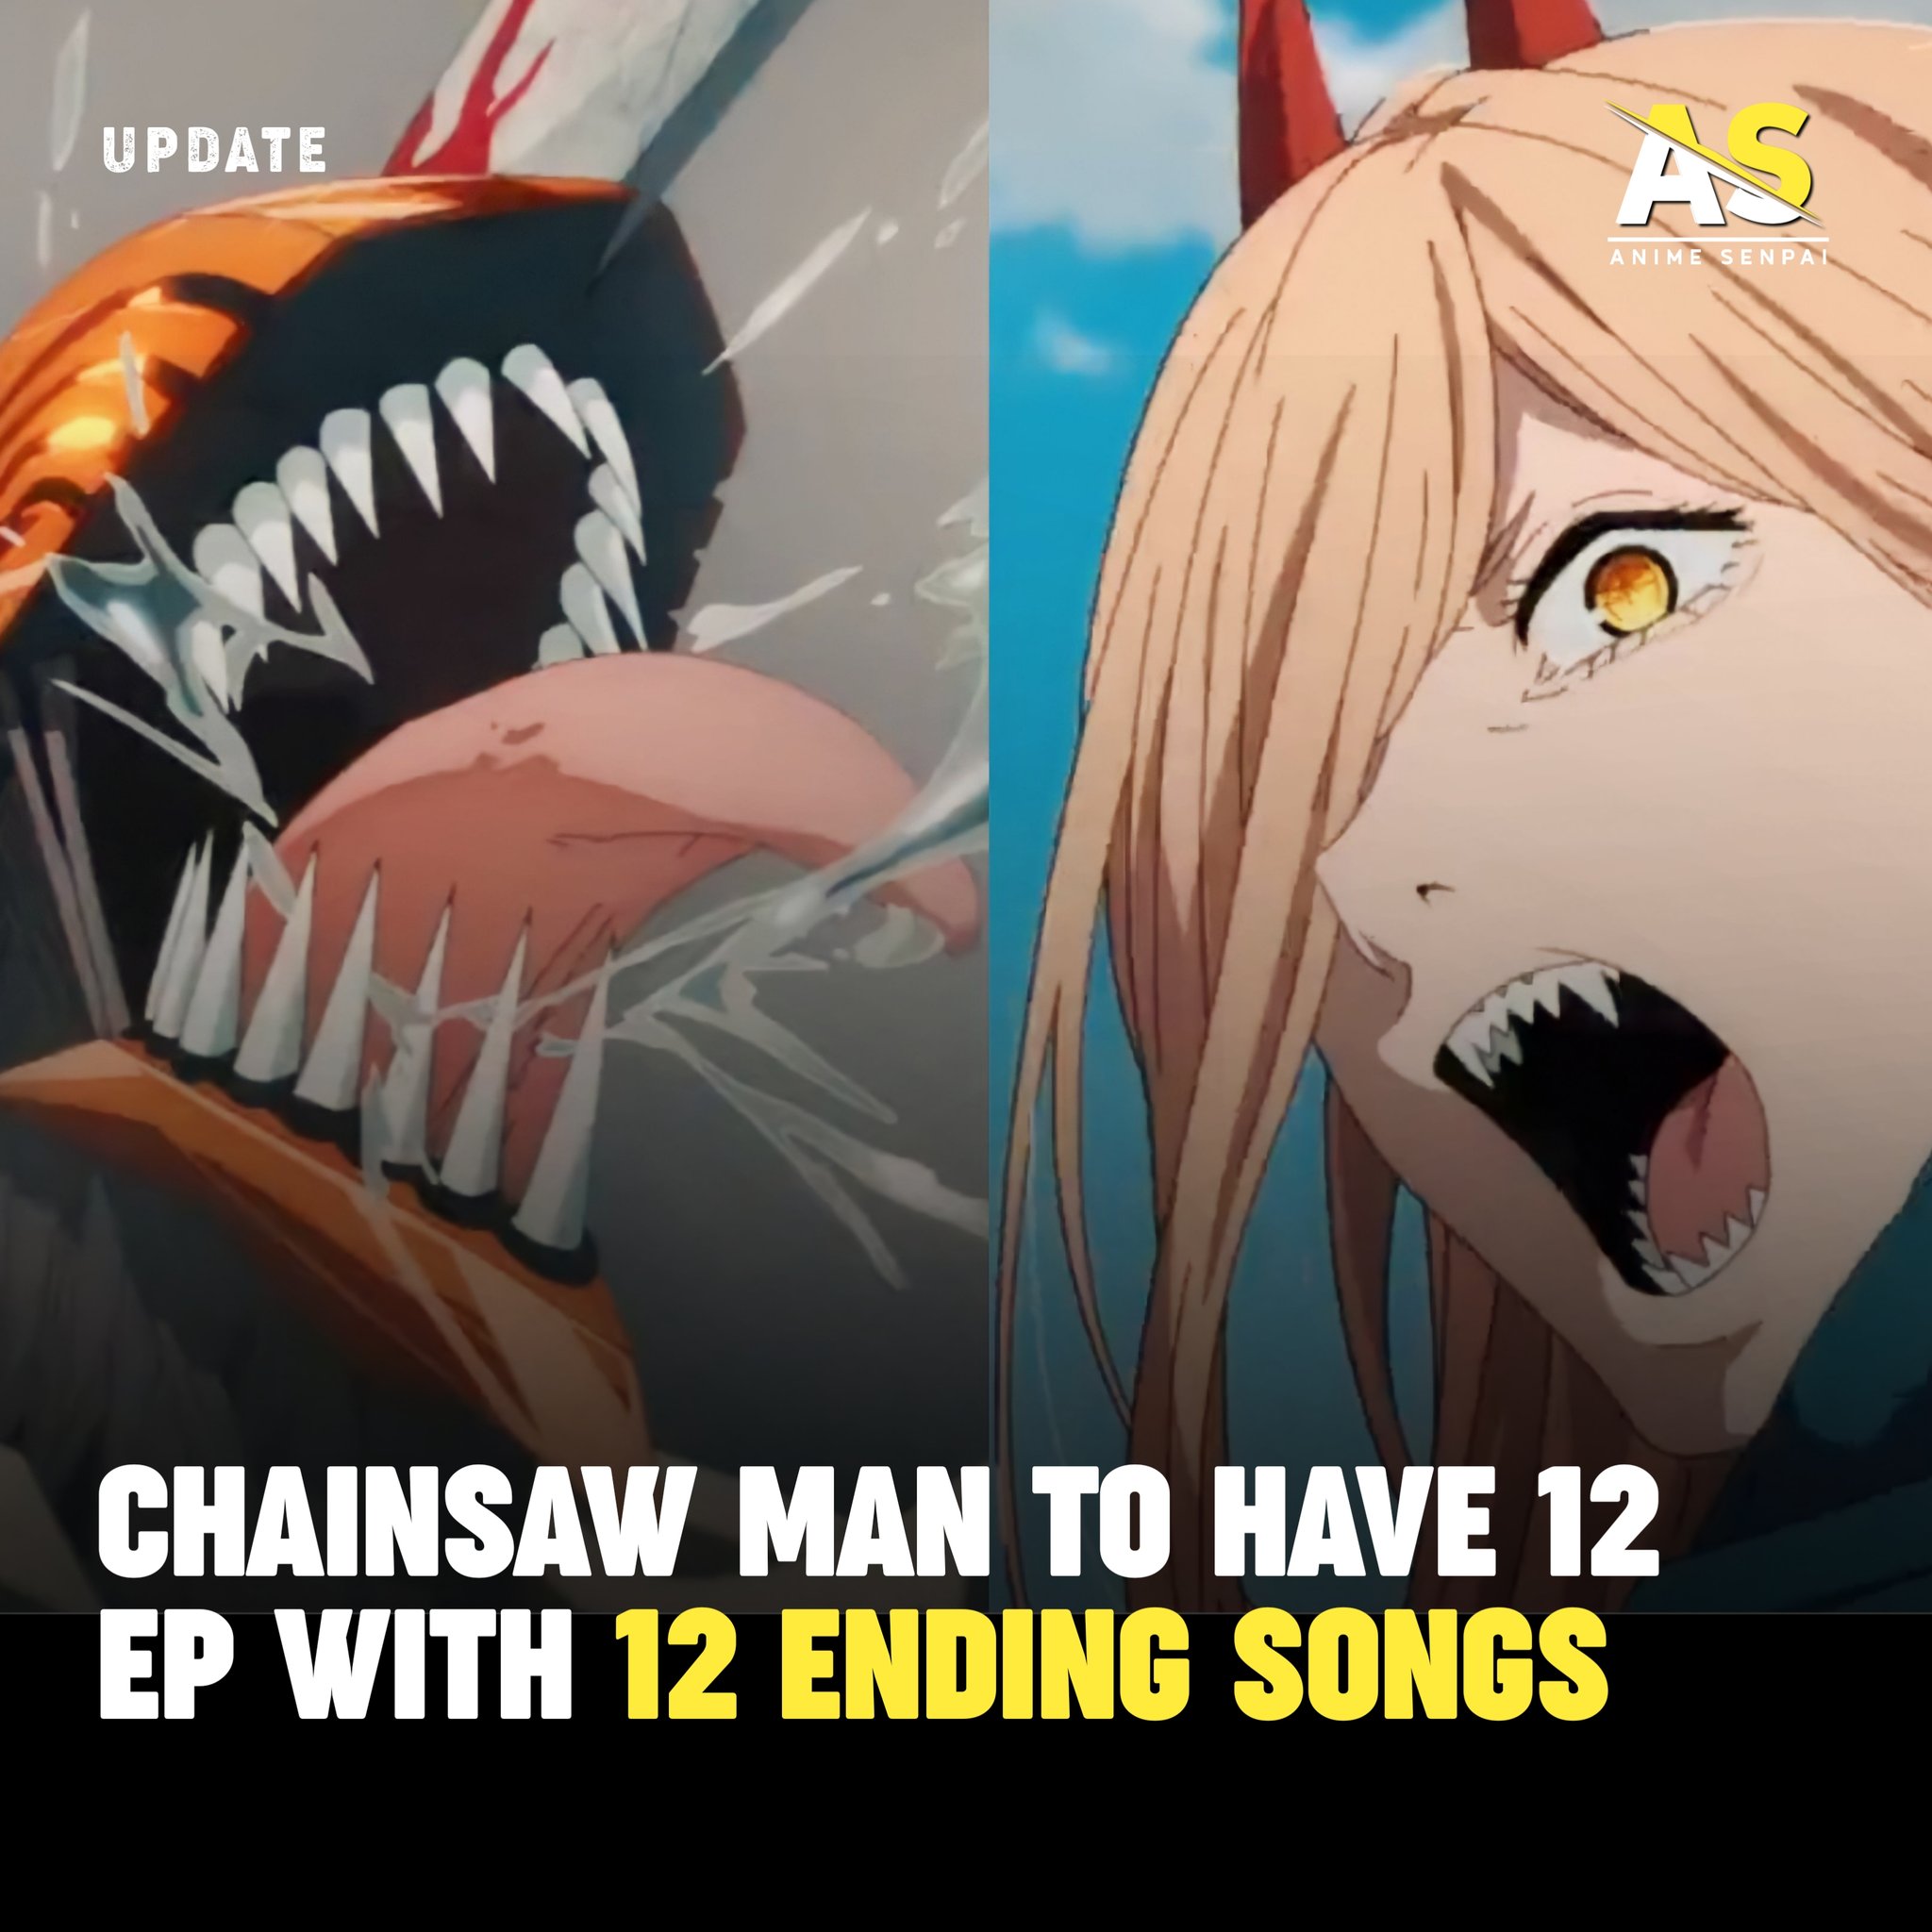 Chainsaw Man has 12 different ending theme songs, one for each episode